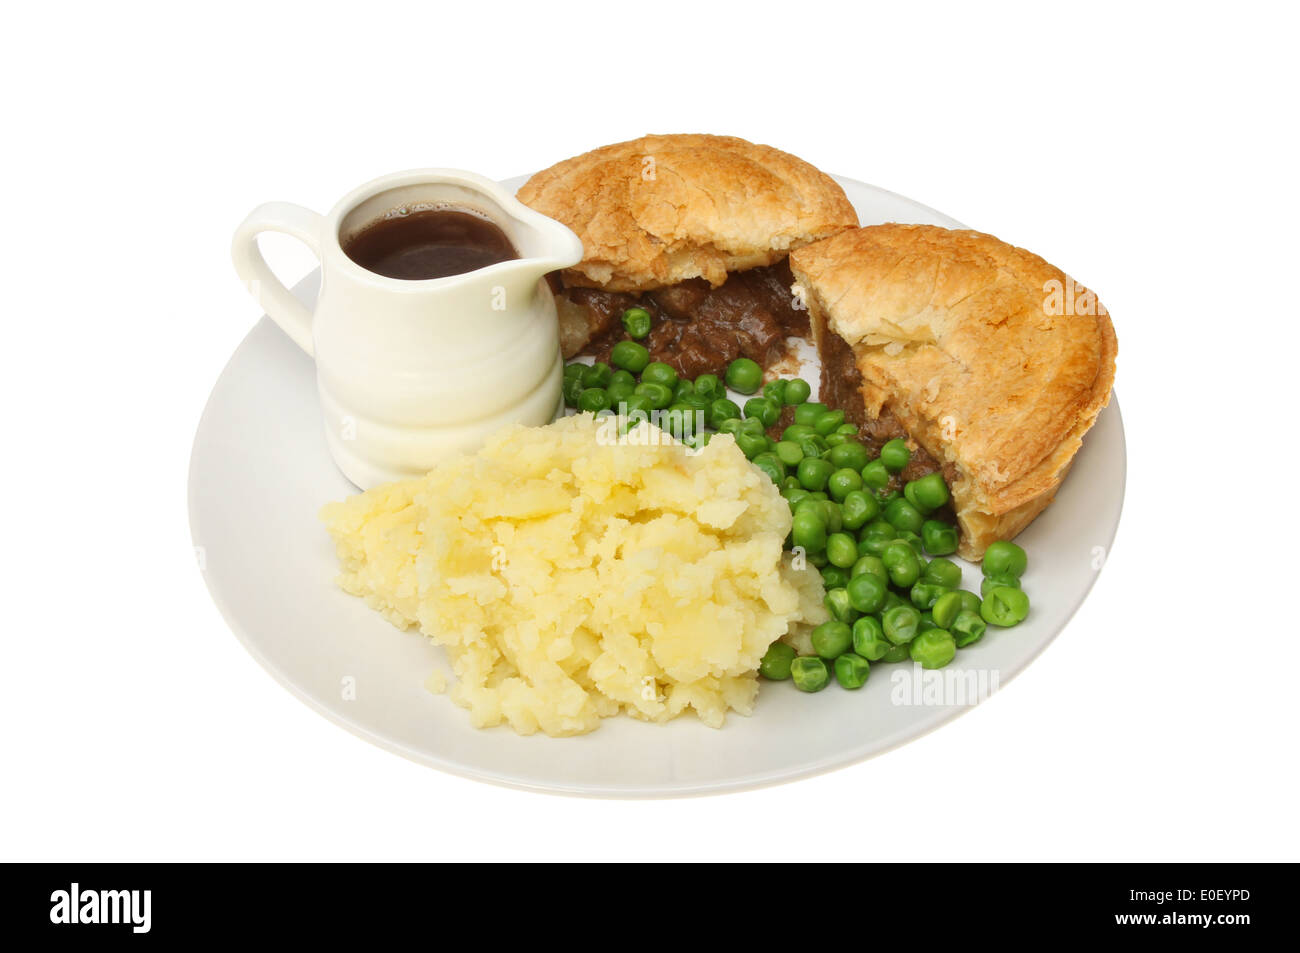 Meat pie, mashed potato and peas with a jug of gravy on a plate isolated against white Stock Photo